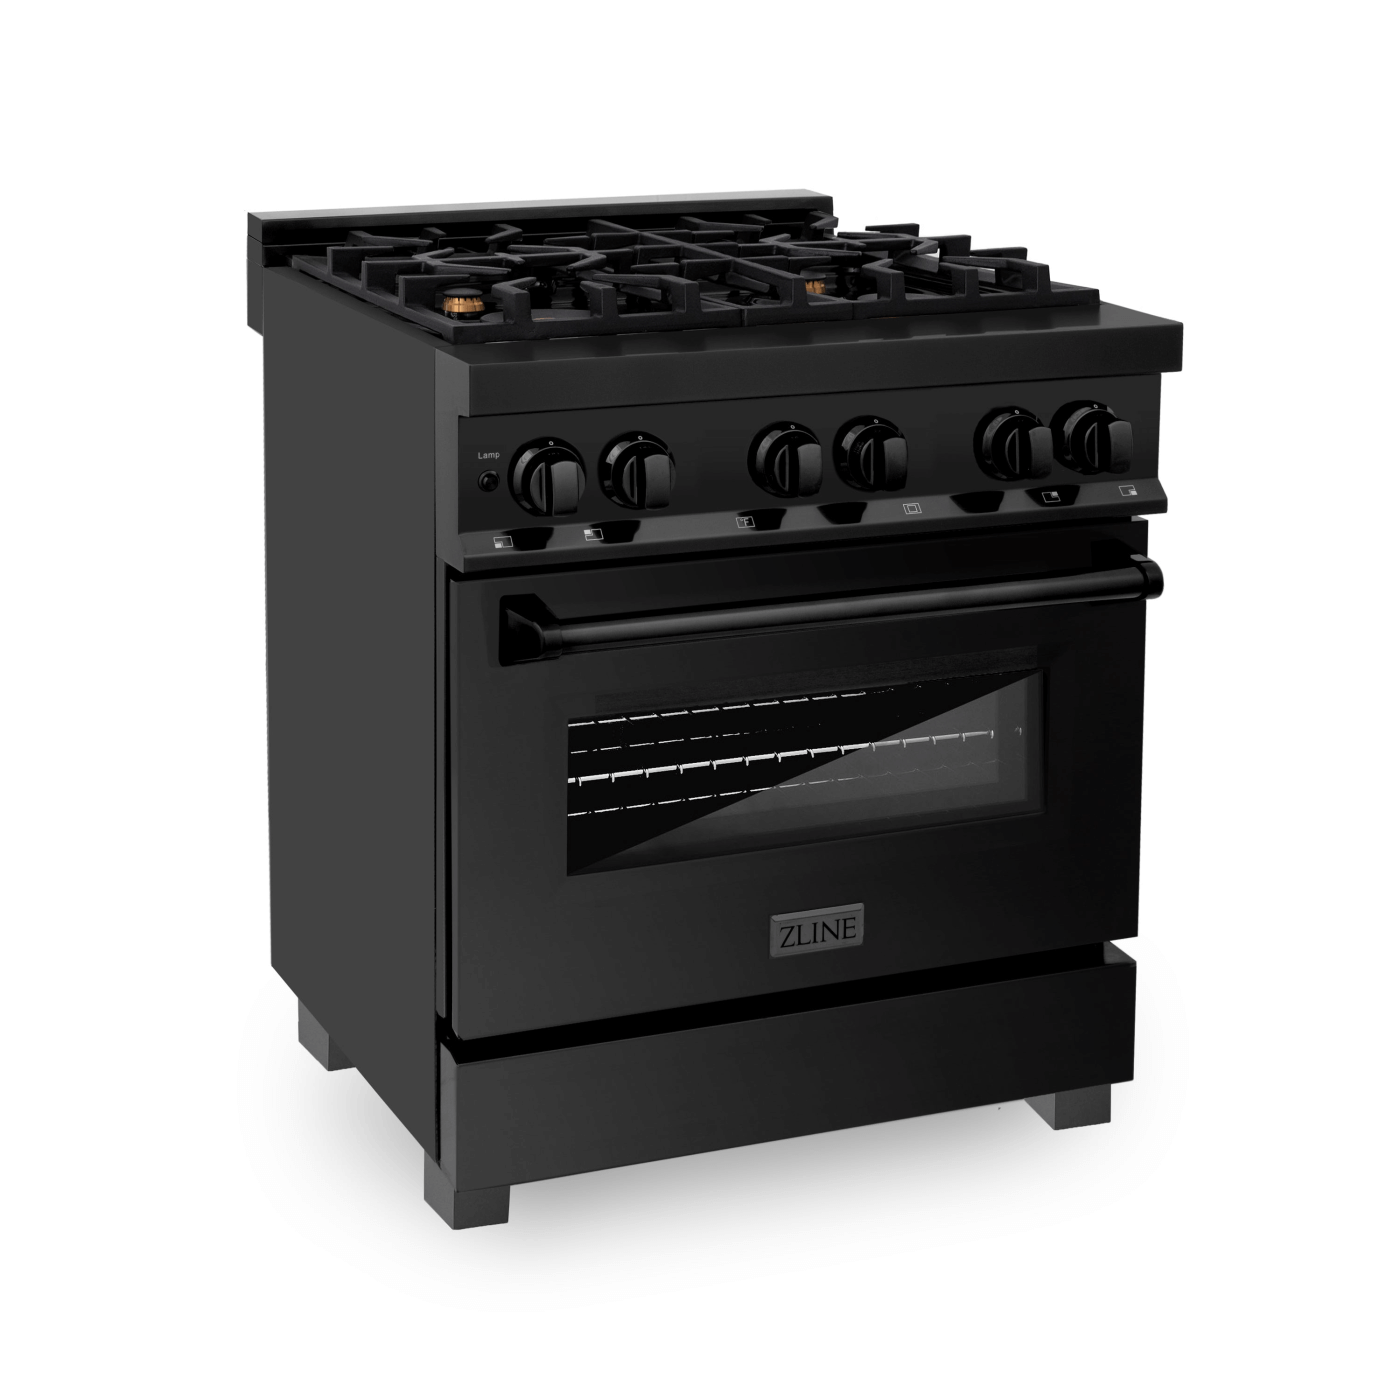 ZLINE 30 in. 4.0 cu. ft. Dual Fuel Range with Gas Stove and Electric Oven in Black Stainless Steel with Brass Burners (RAB-BR-30) - white background